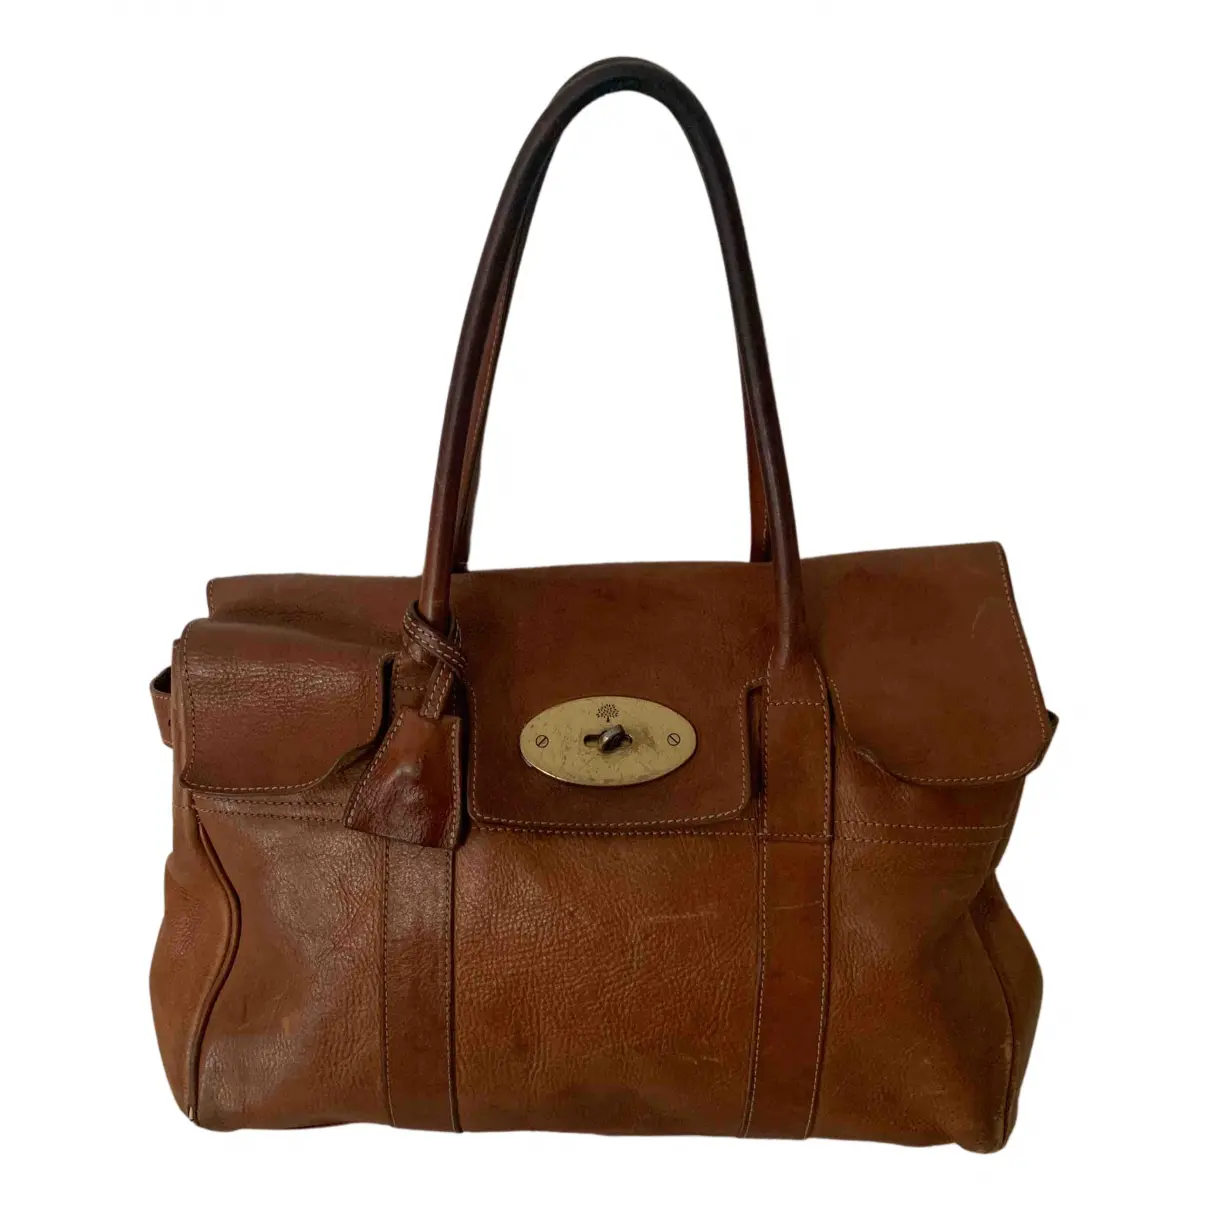 Bayswater leather tote Mulberry - Vintage